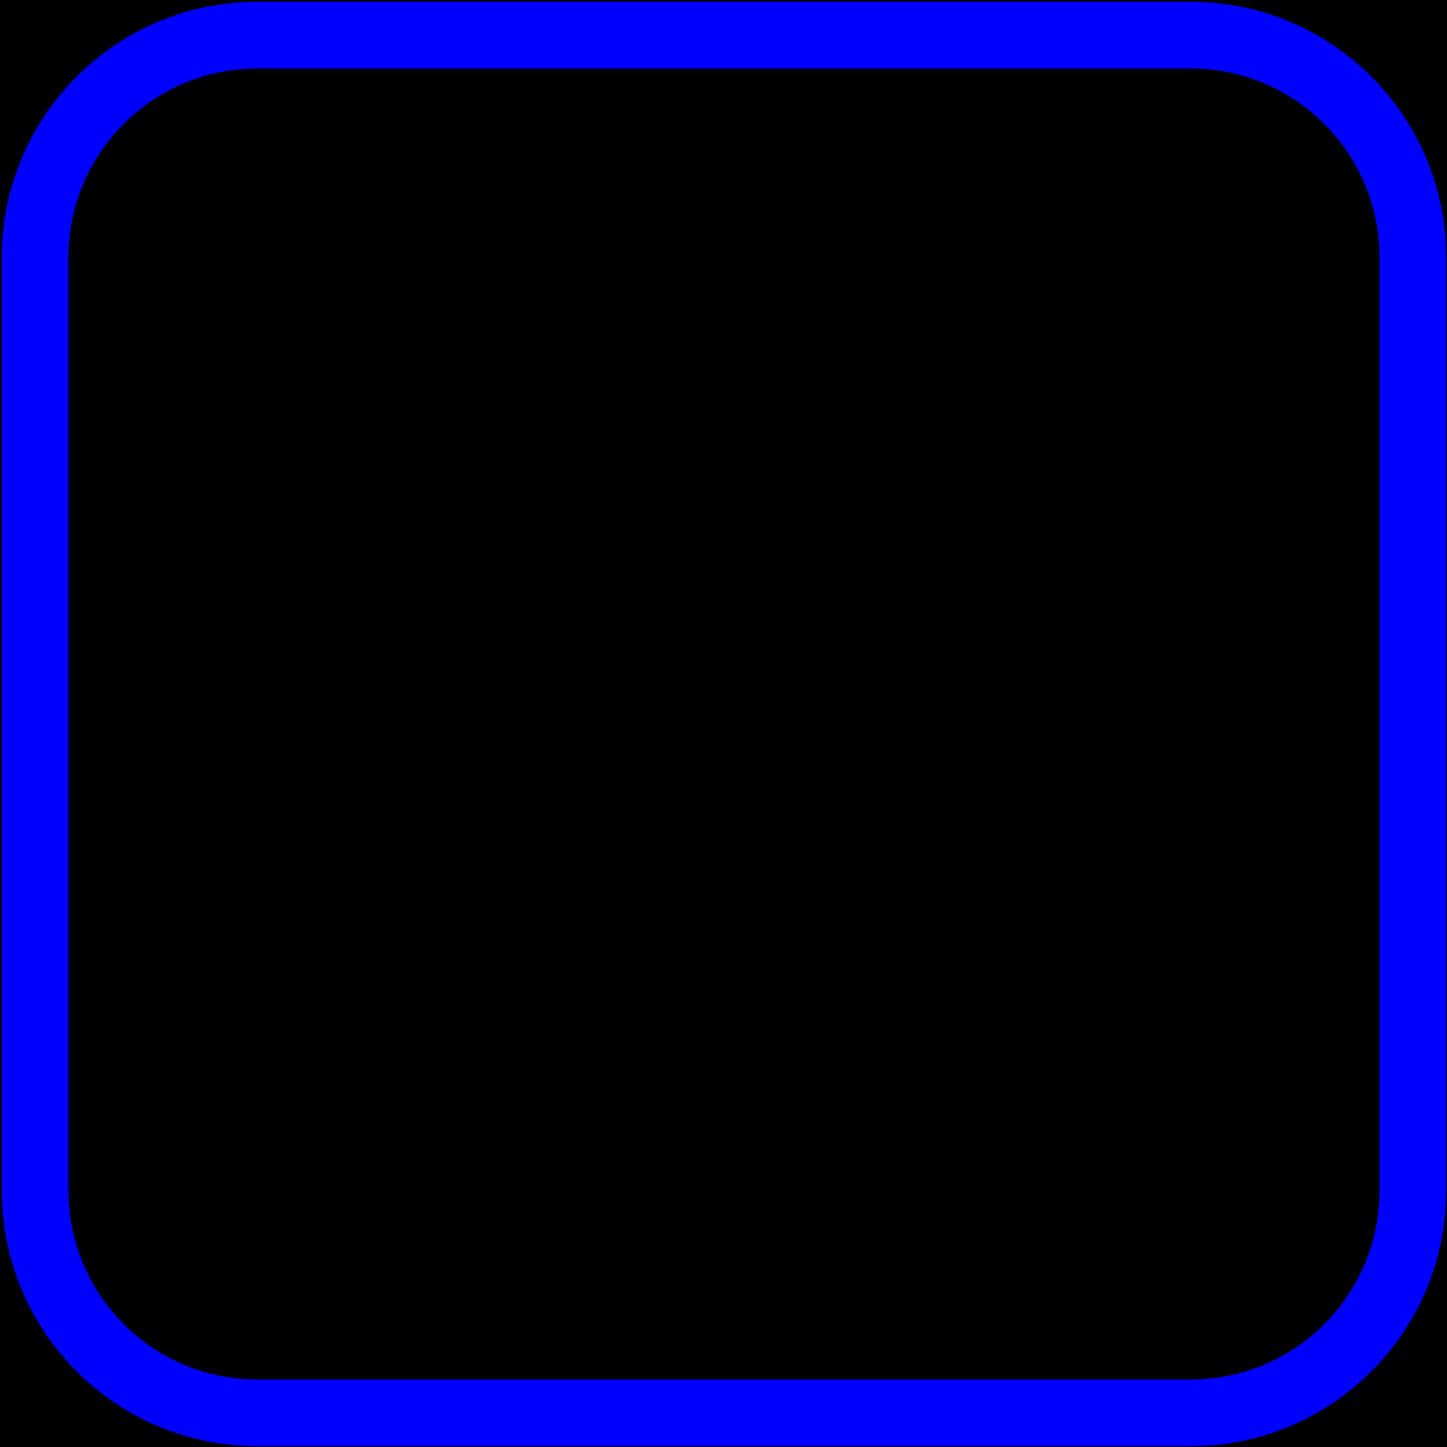 A Blue Square With Black Background